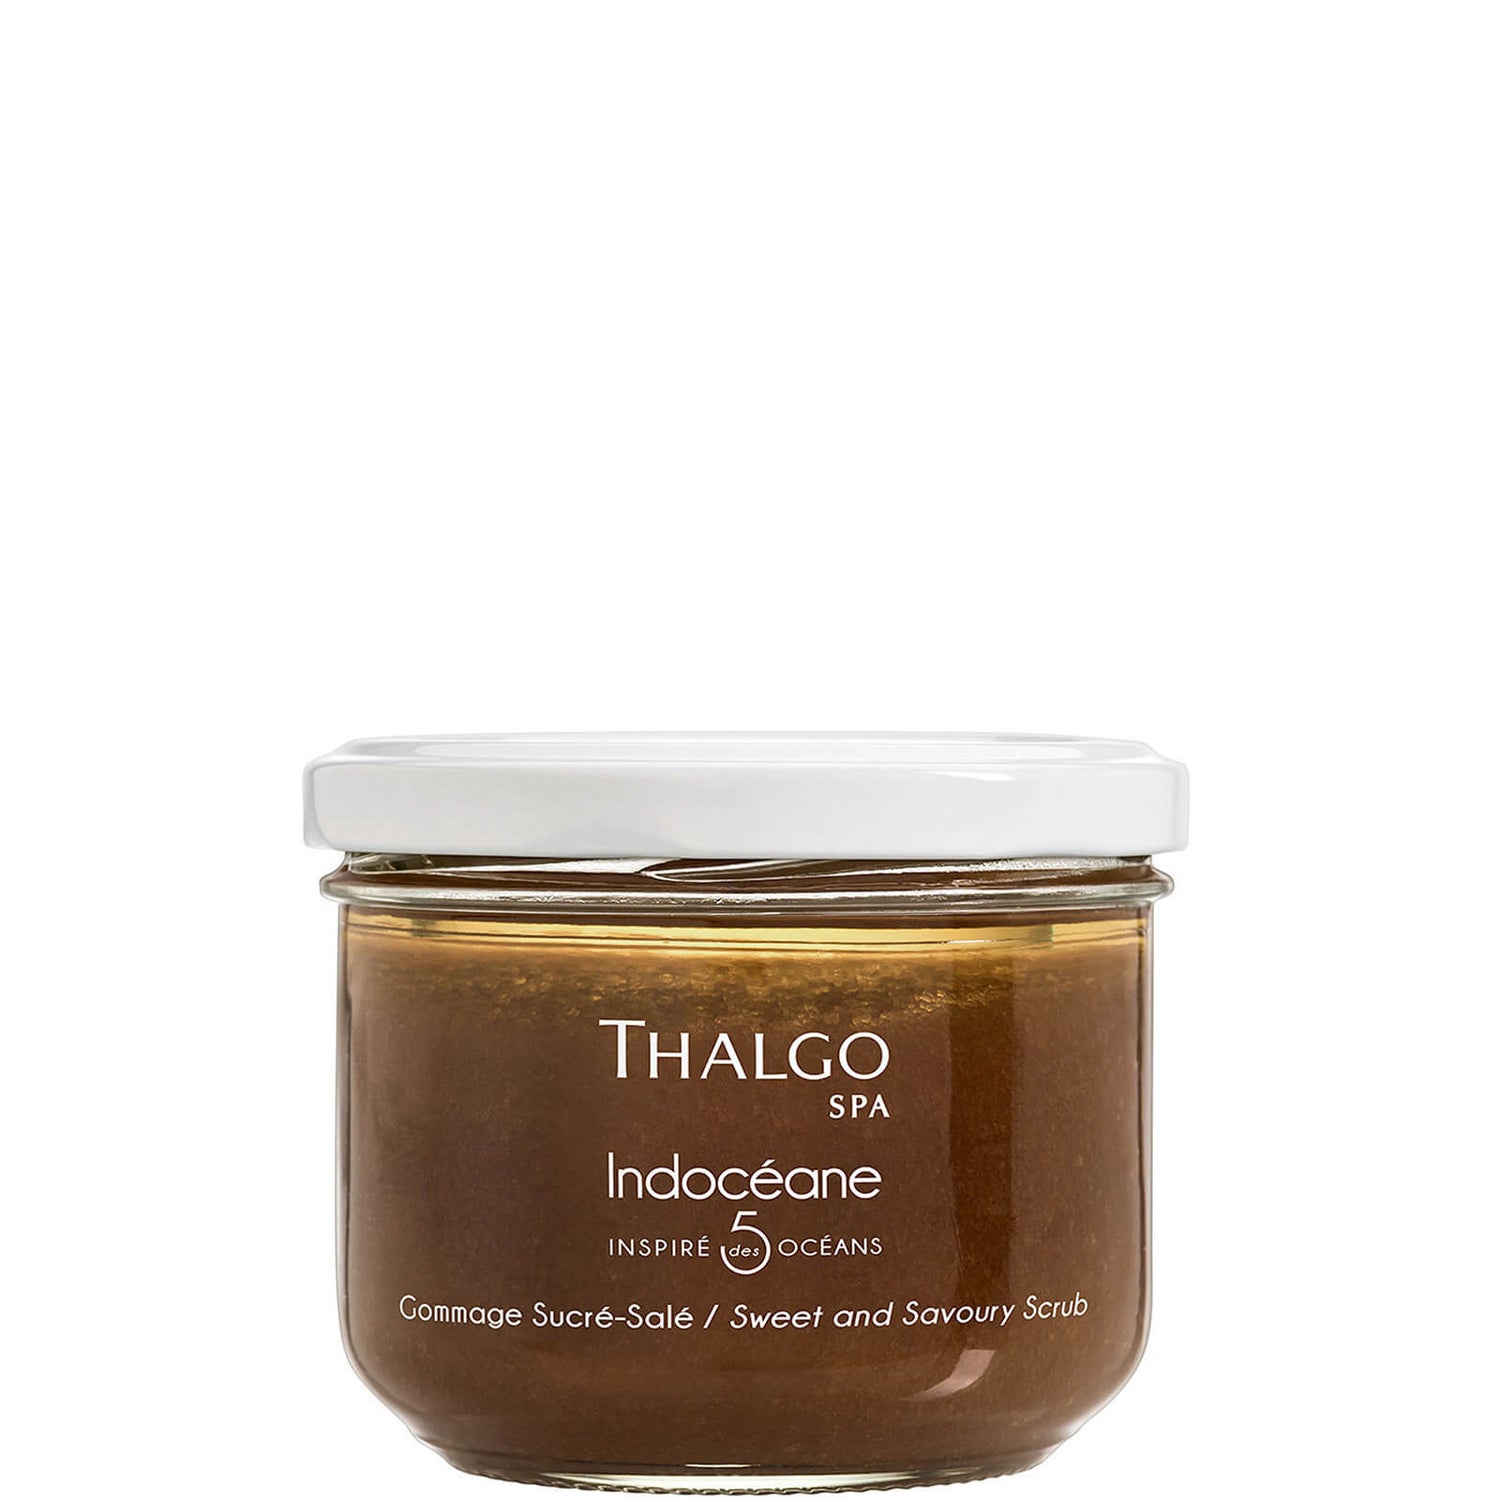 Thalgo Spa Line Indoceane Sweet and Savoury Body Scrub 250g